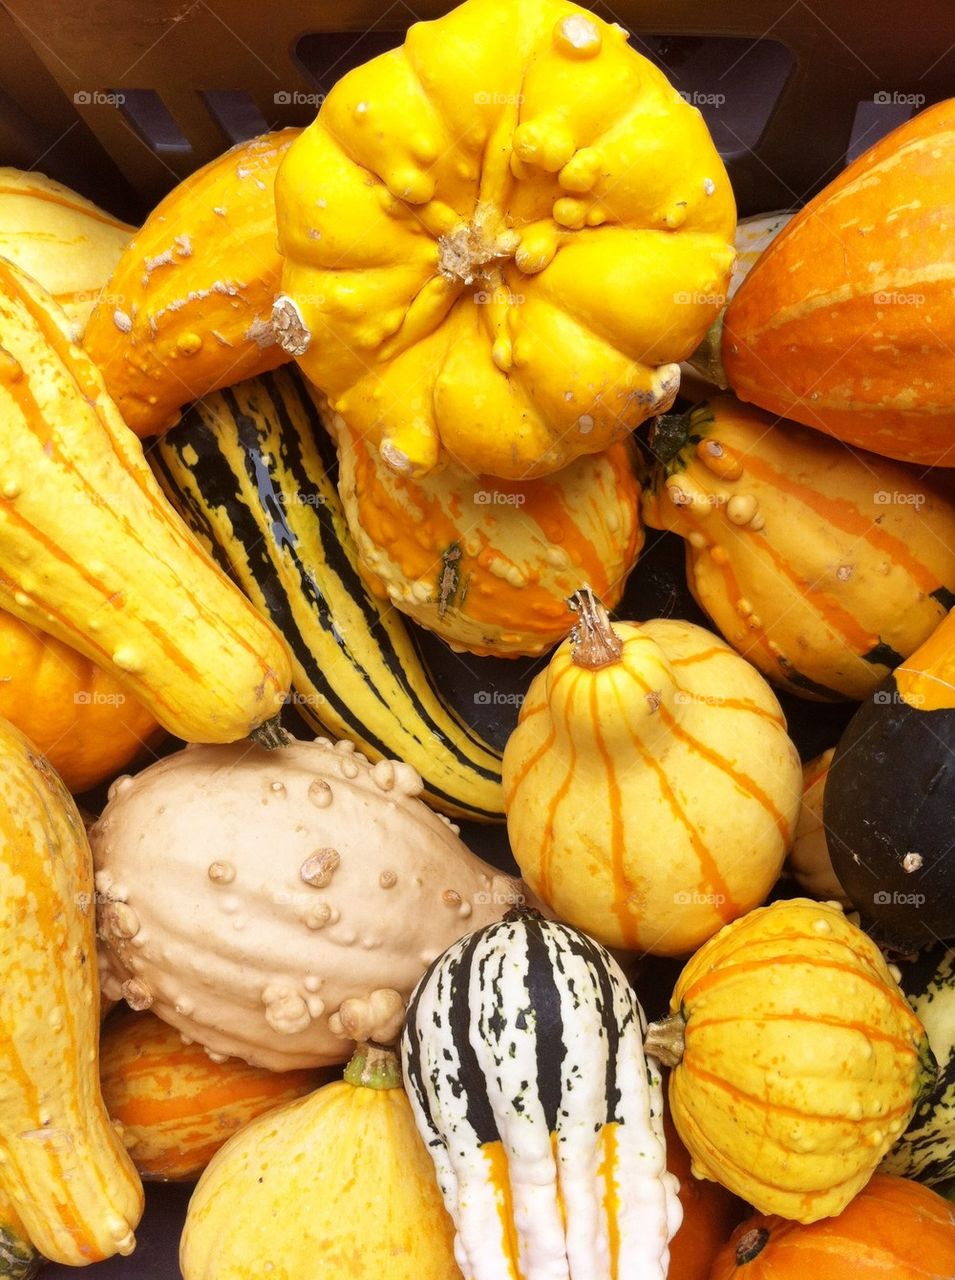 Small pumpkins and gourds in fall.